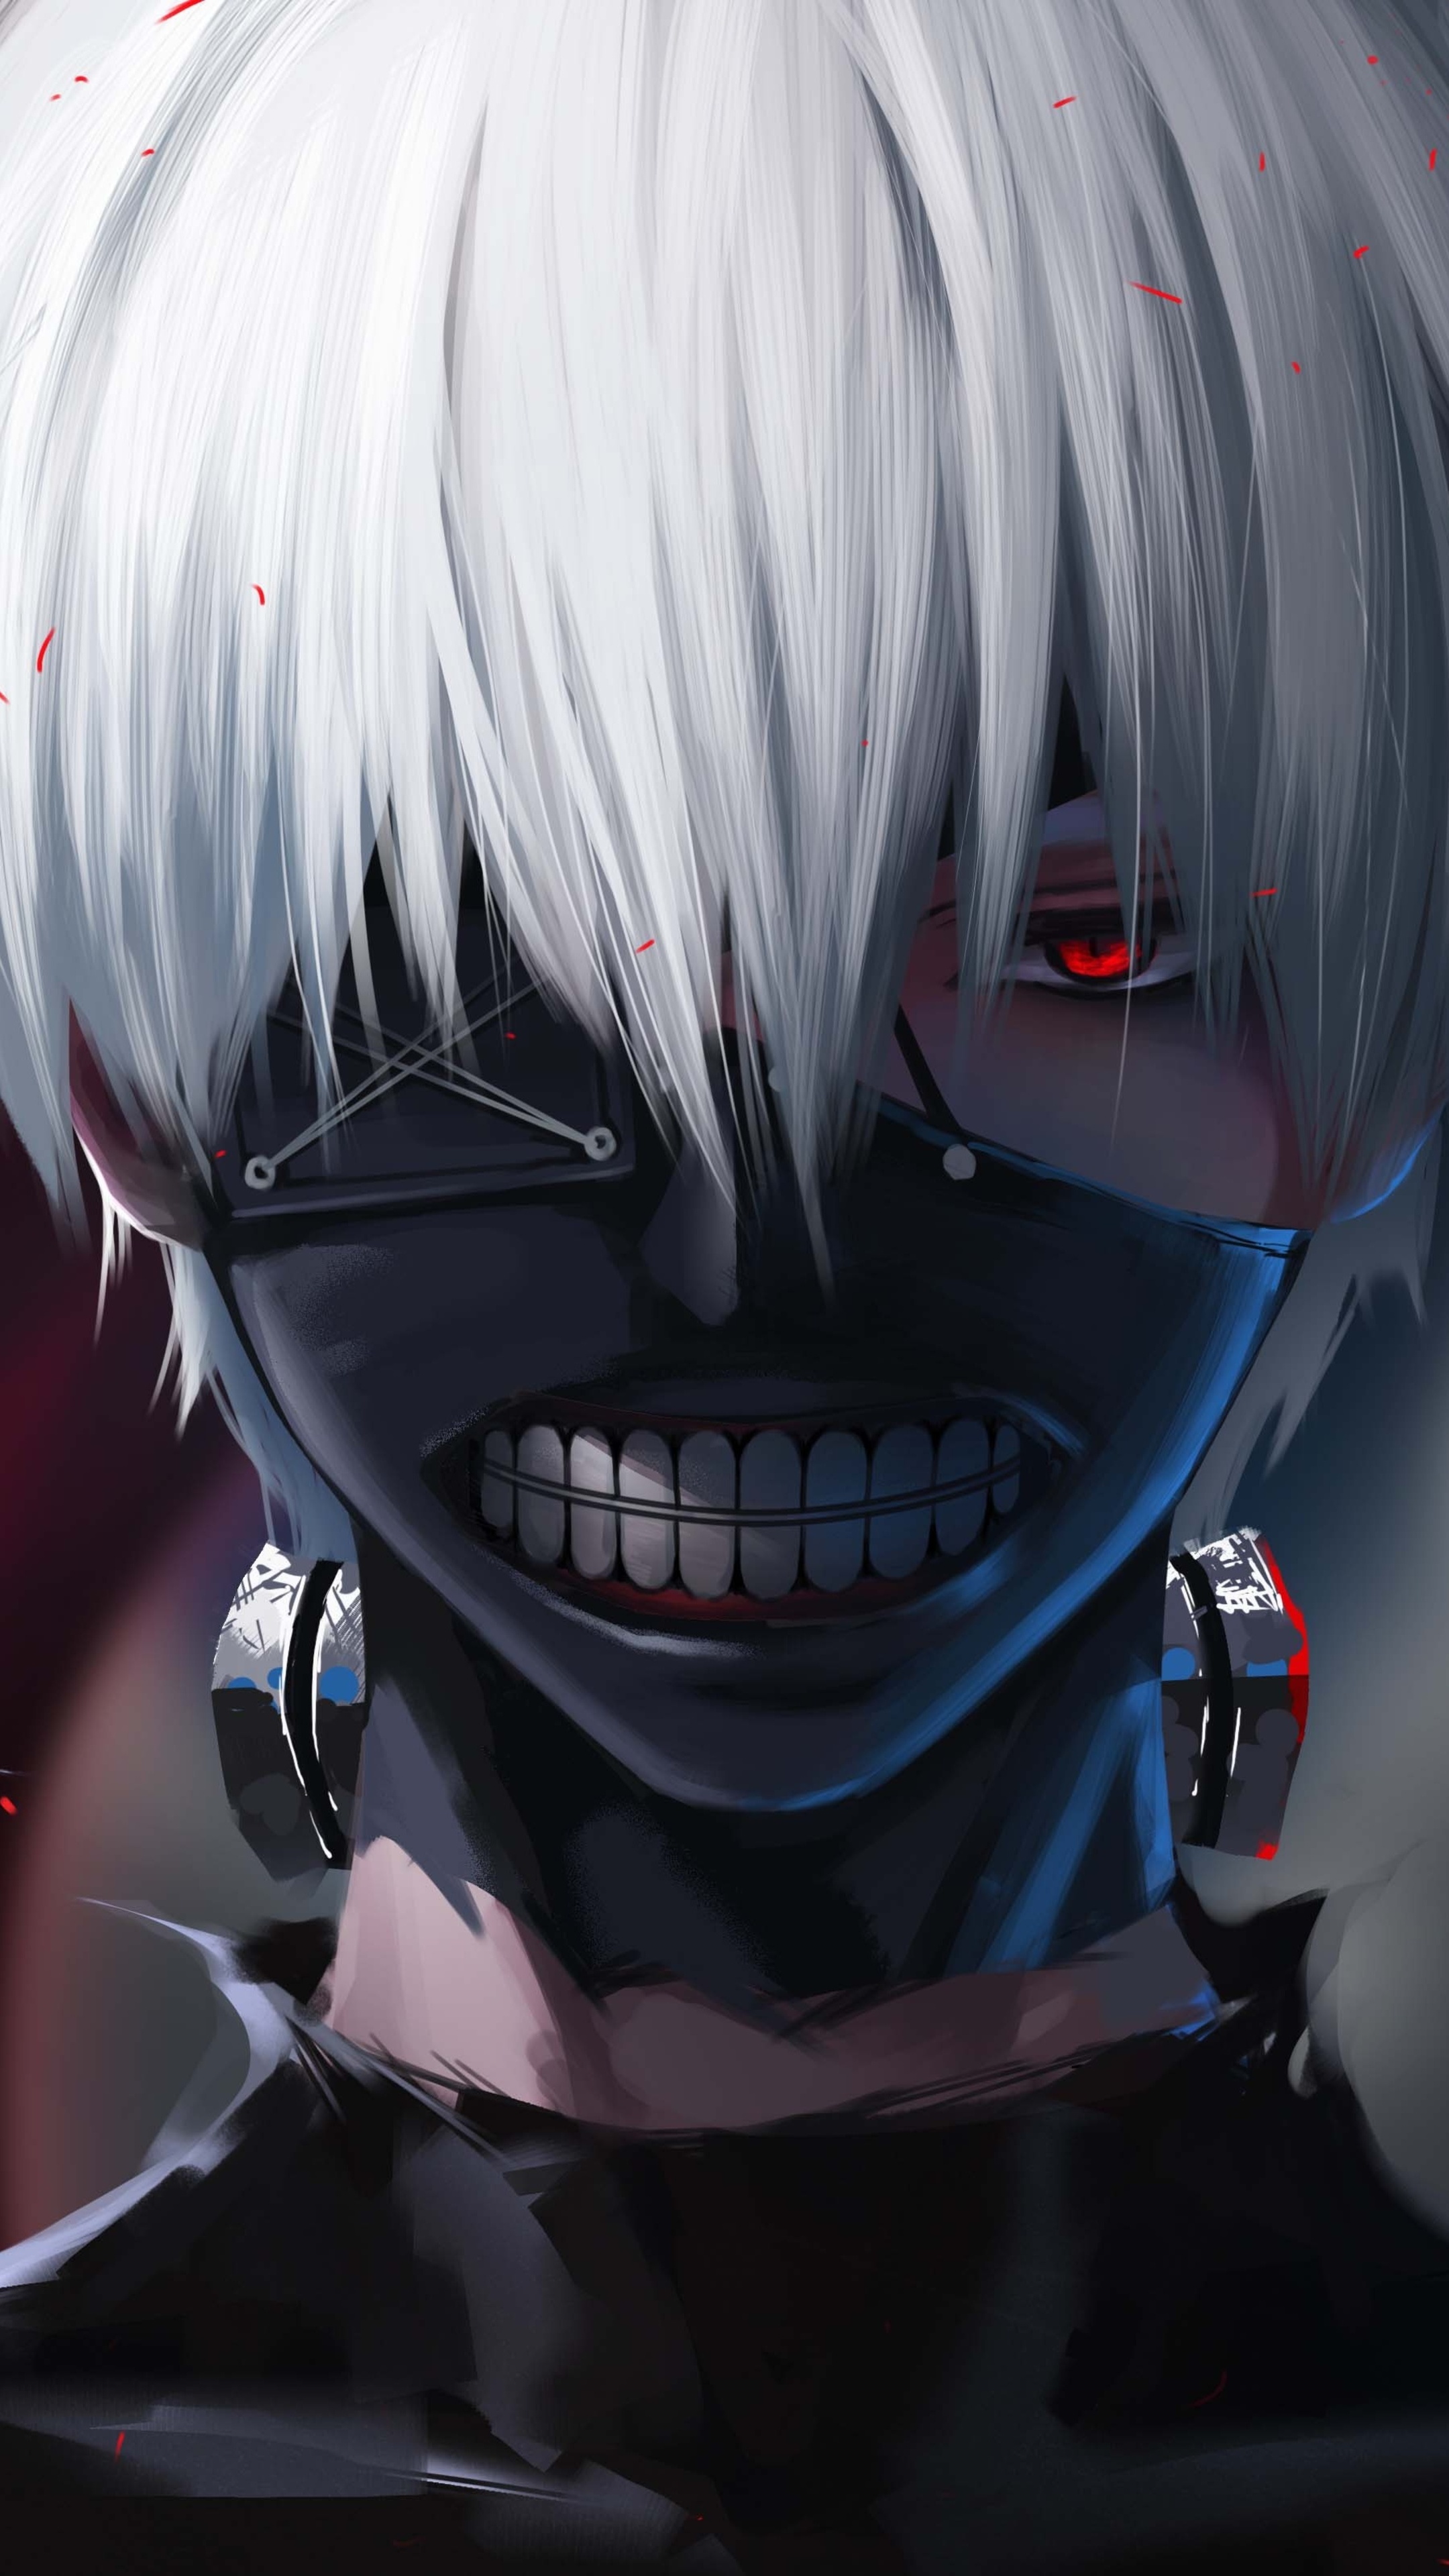 Tokyo Ghoul anime, 4K wallpapers, Sony Xperia devices, Visual brilliance, 2160x3840 4K Phone